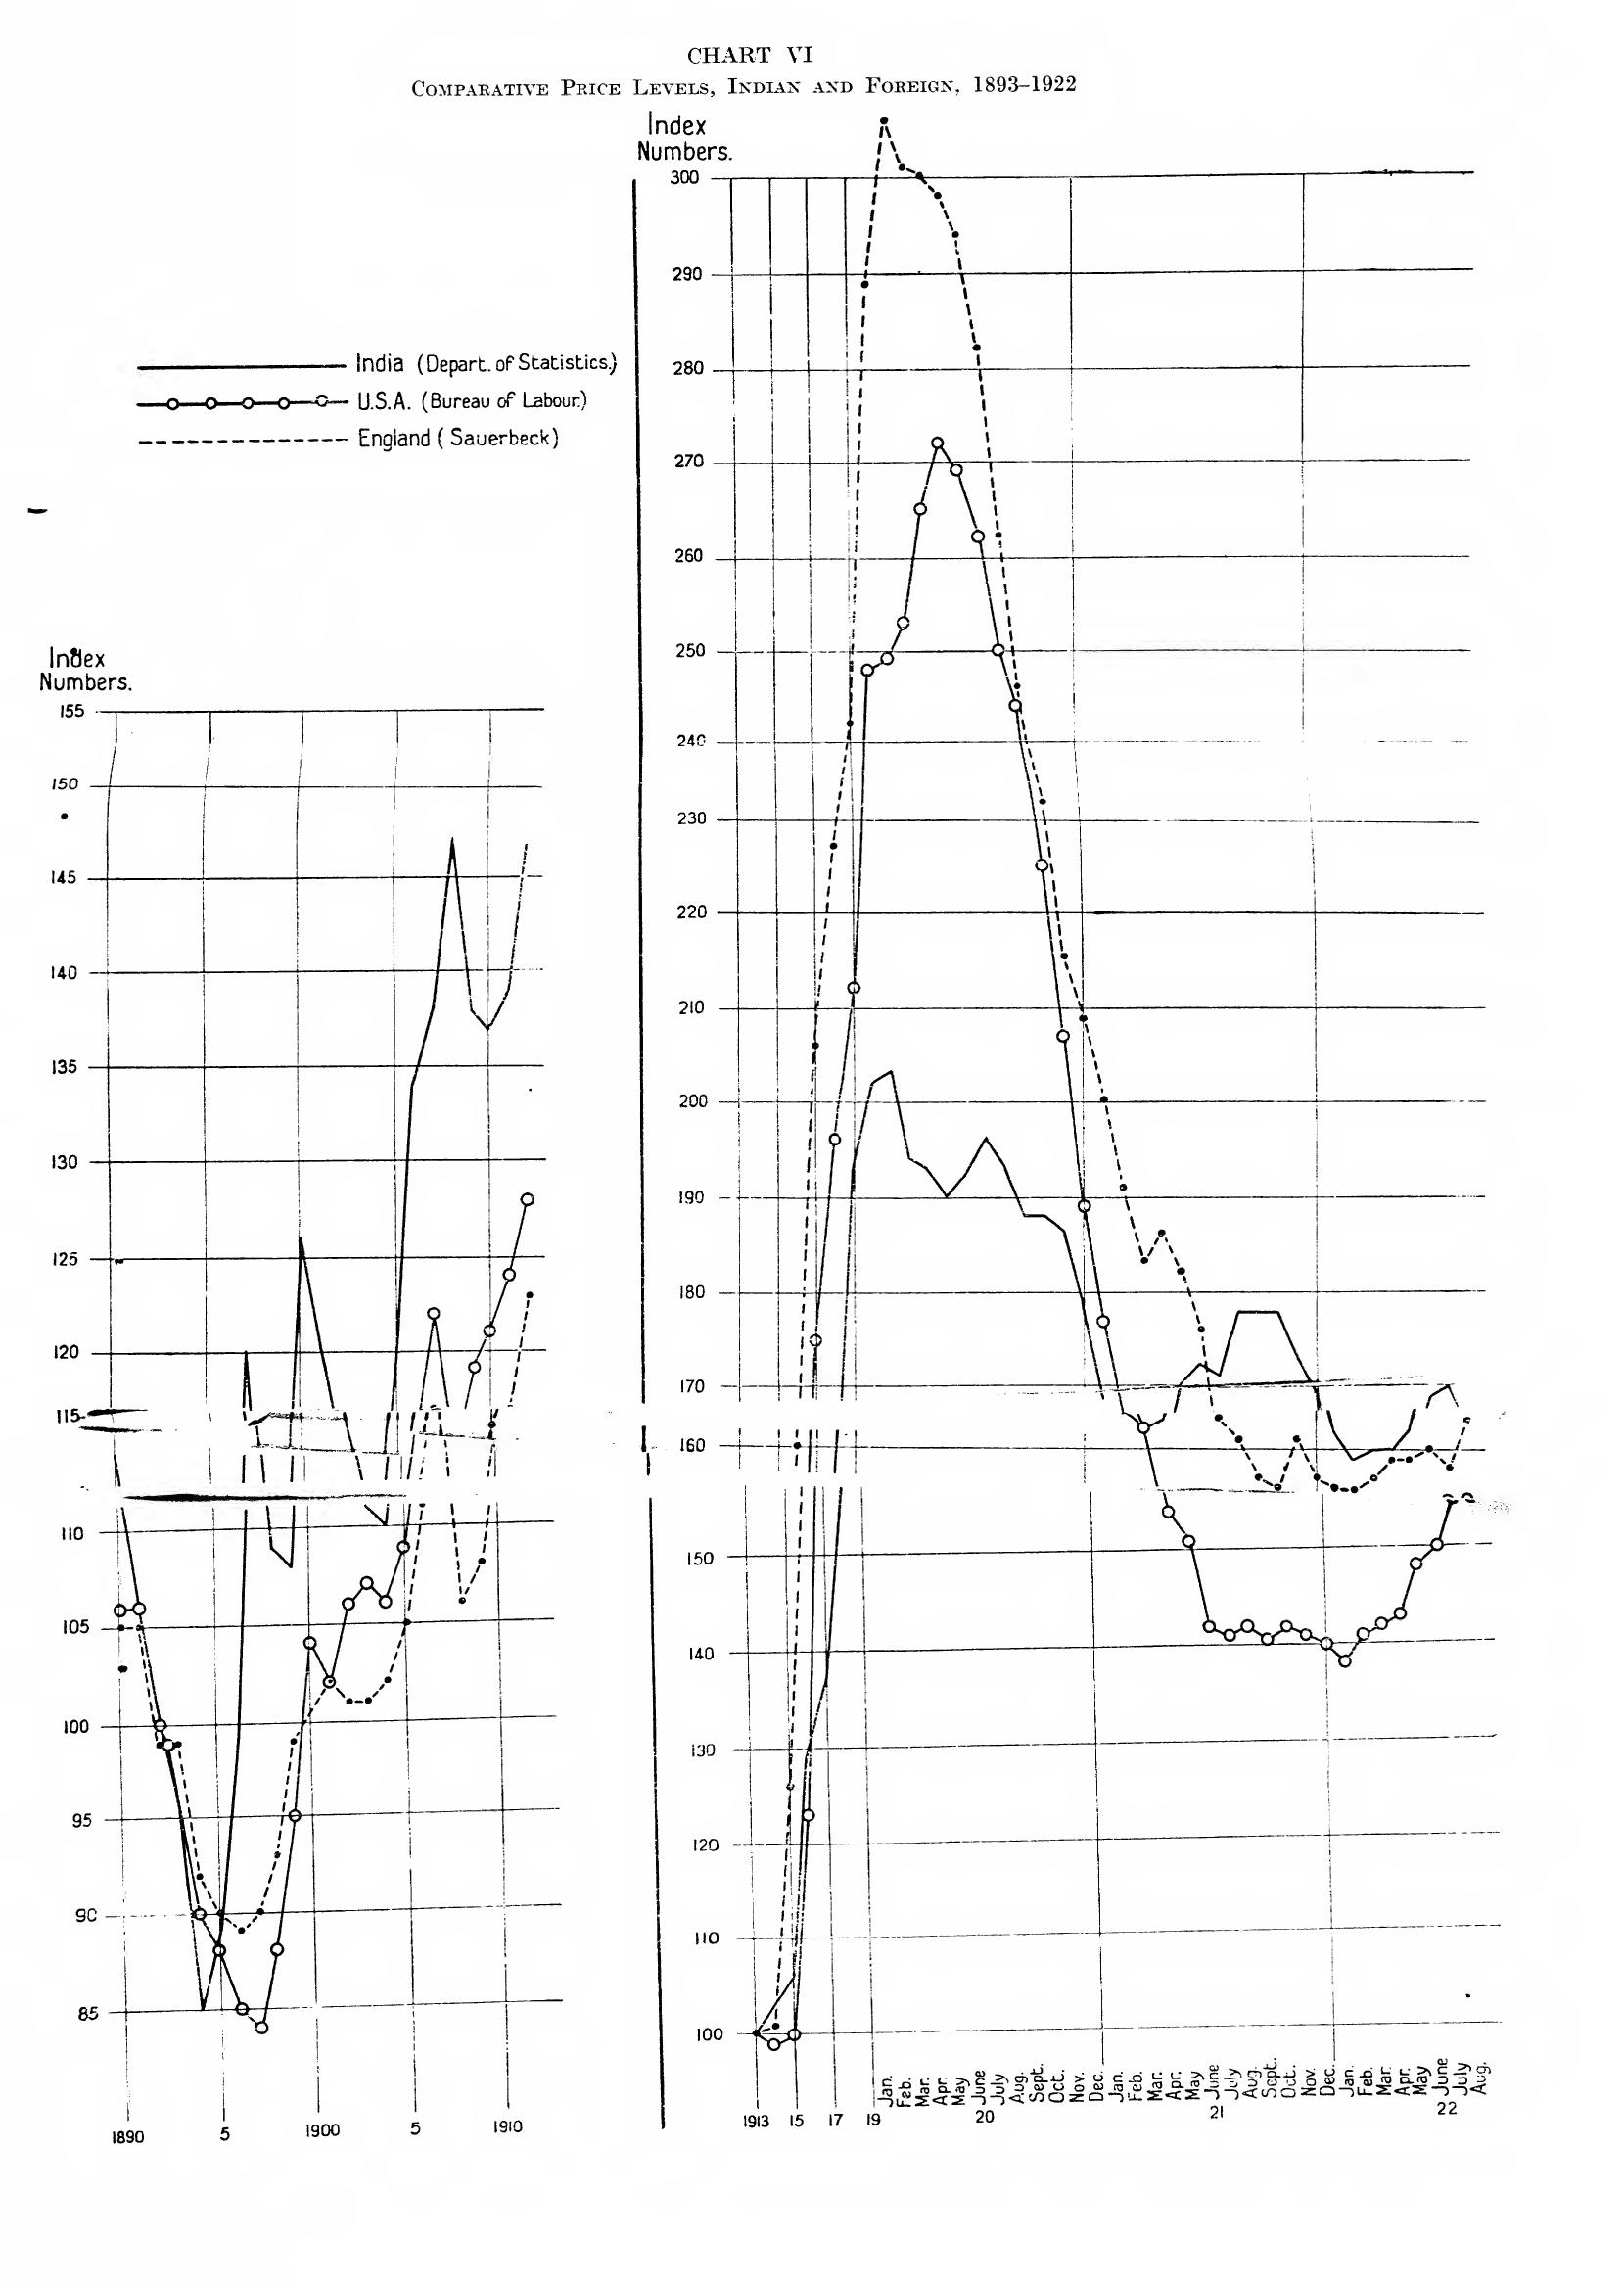 CHART VI: Comparative Price Levels, Indian and Foreign, 1893–1922